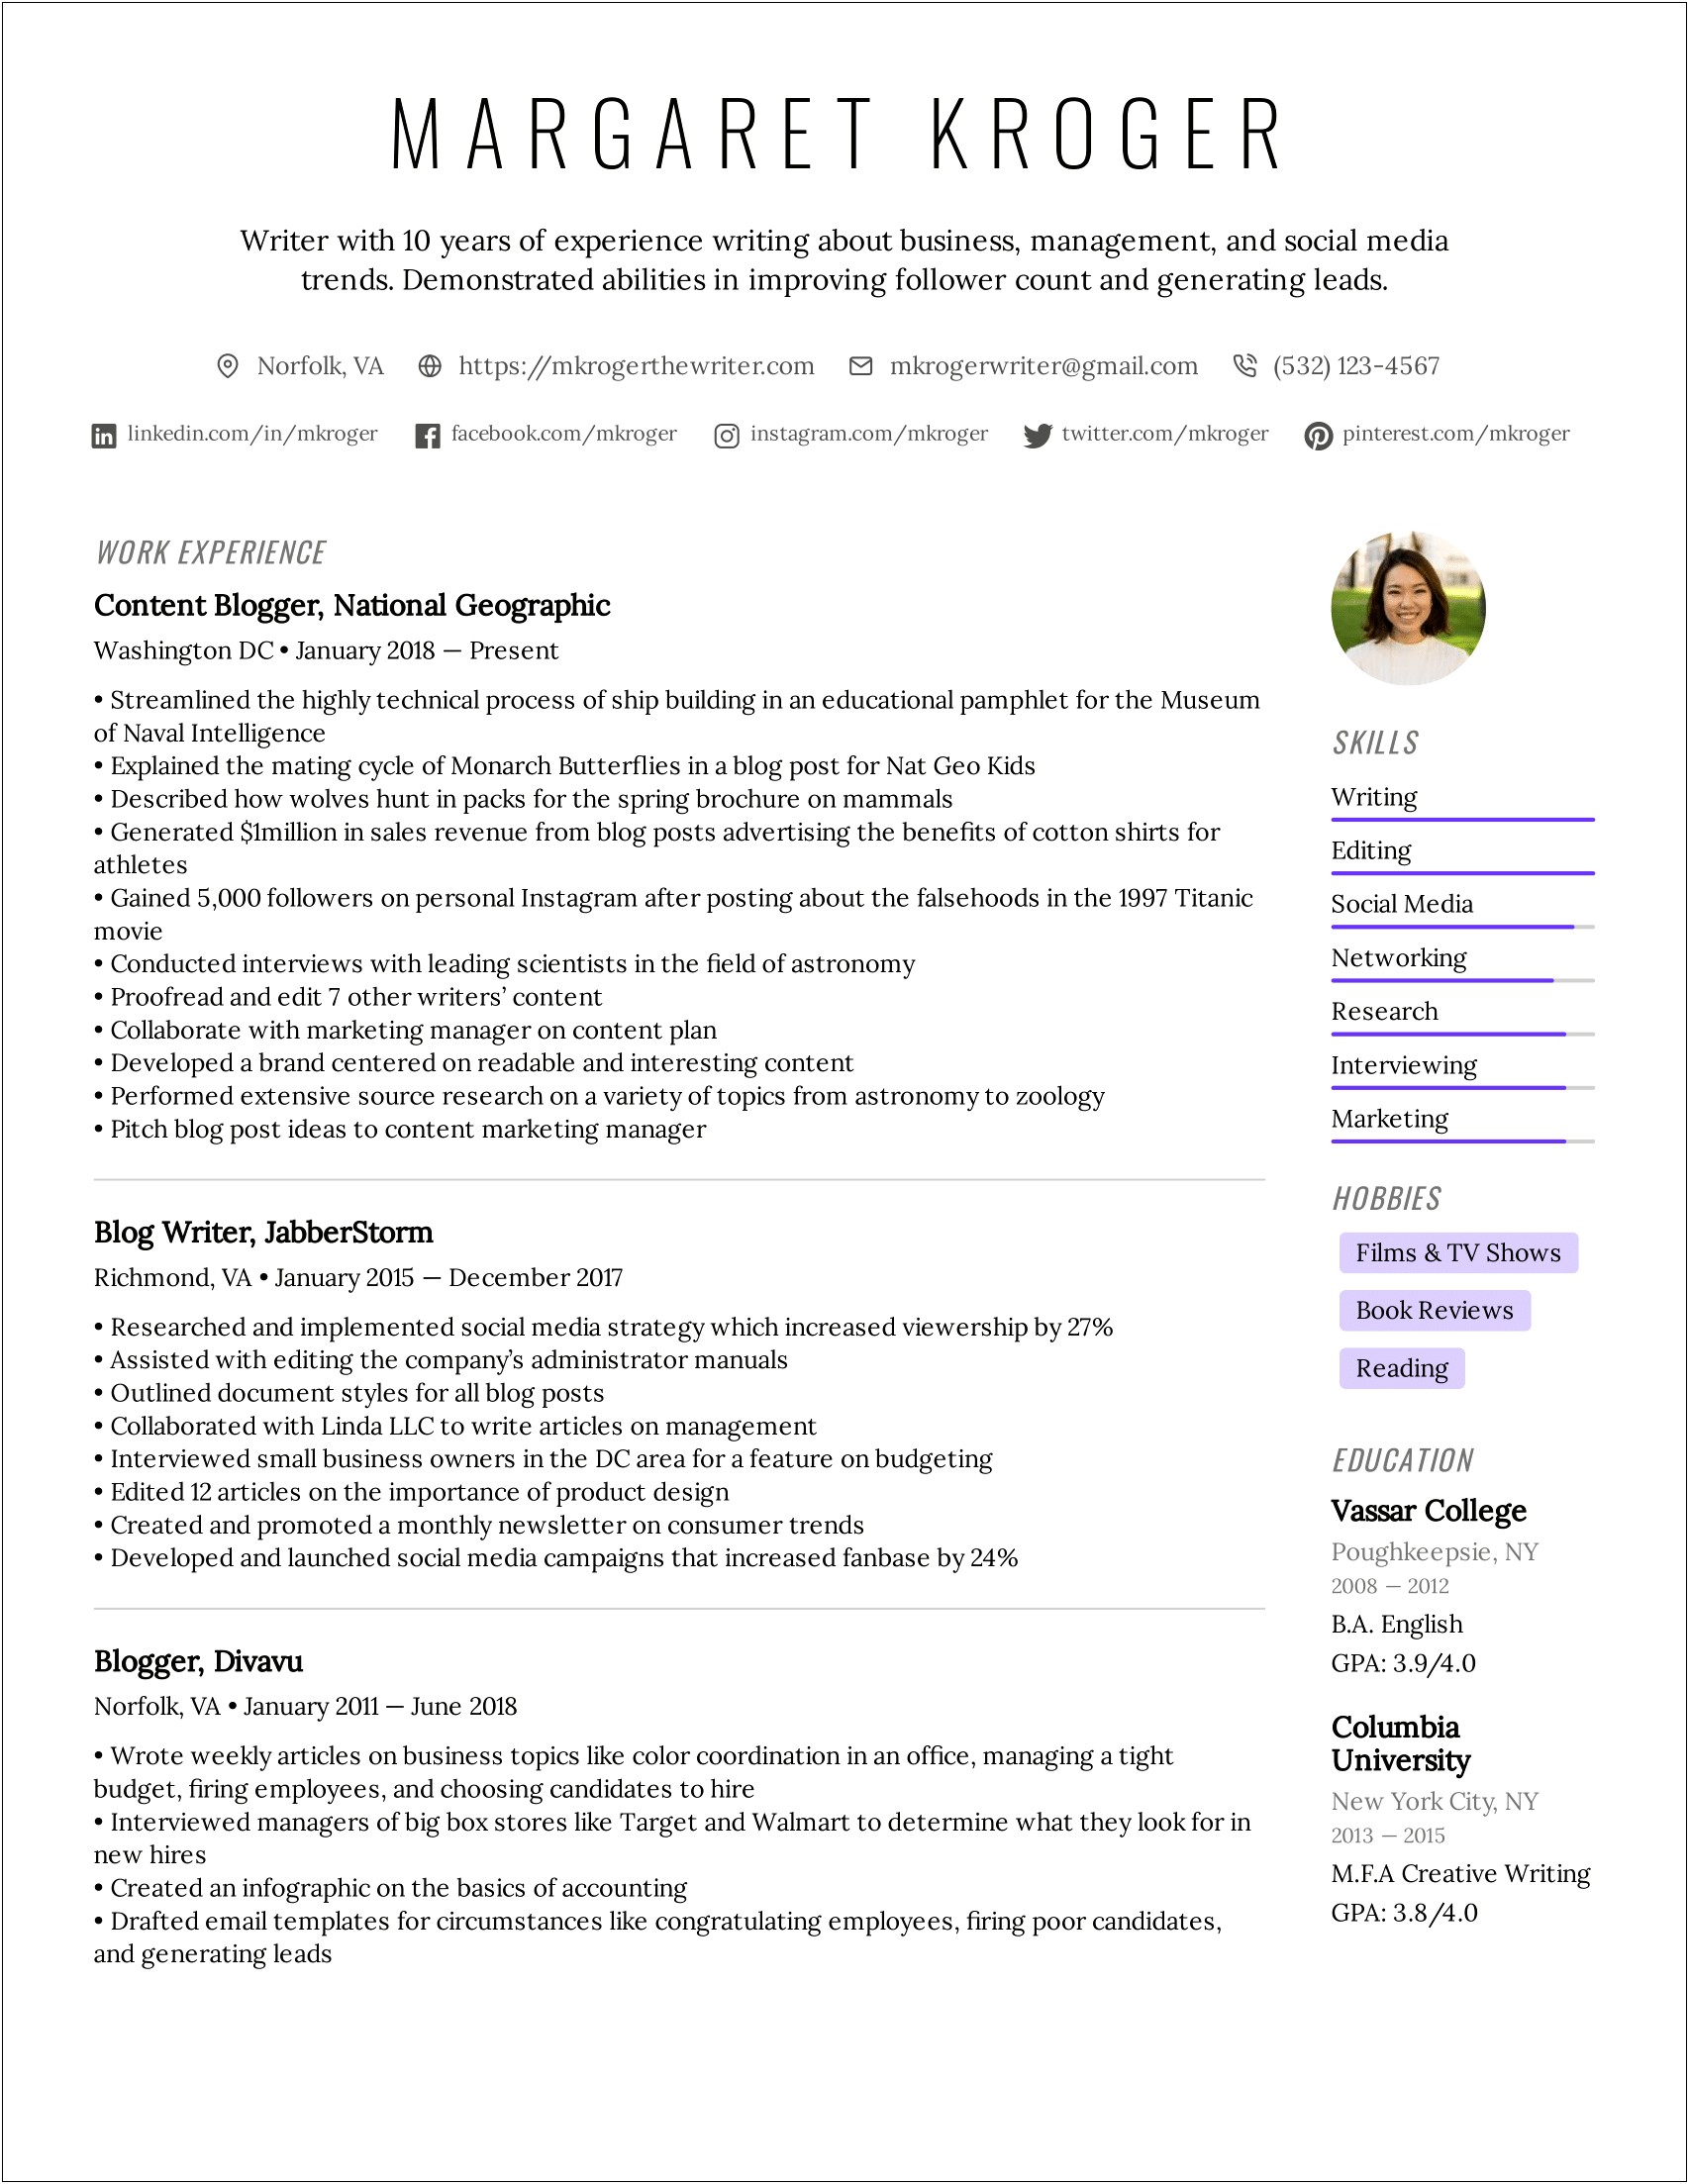 Resume And Cover Letter Creation Blogs